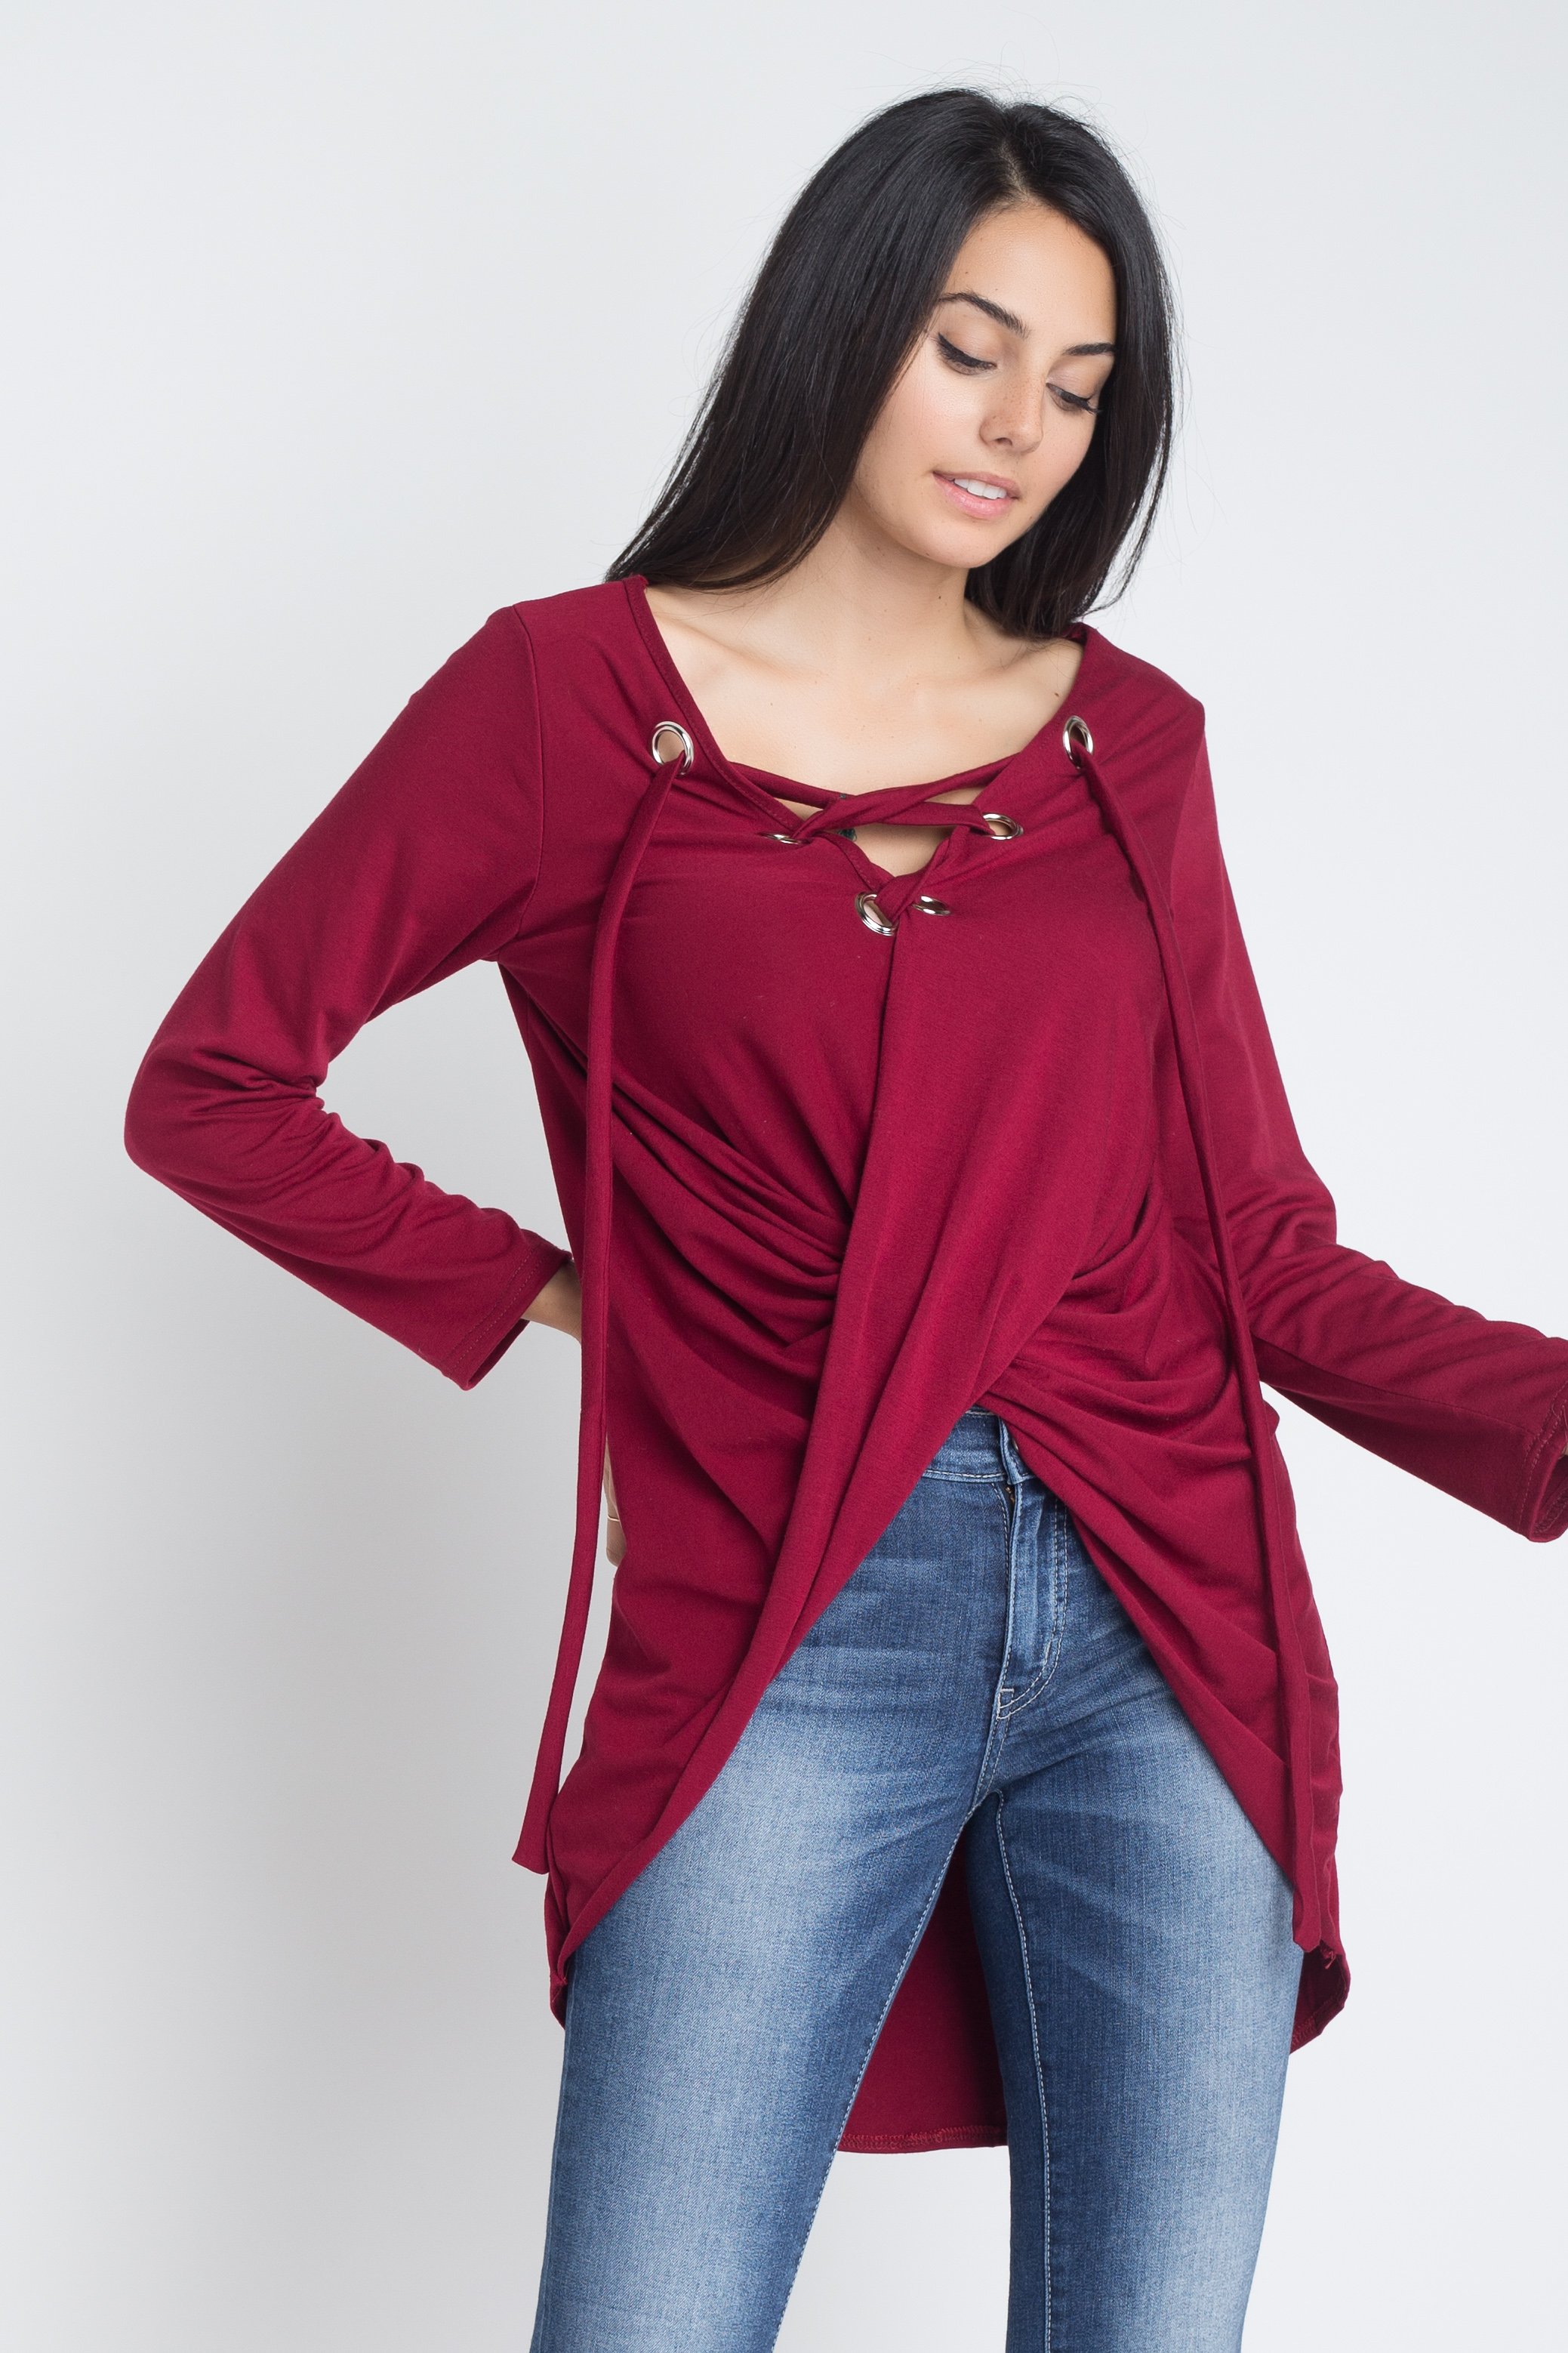 Lace-Up Long Sleeve Fashion Top